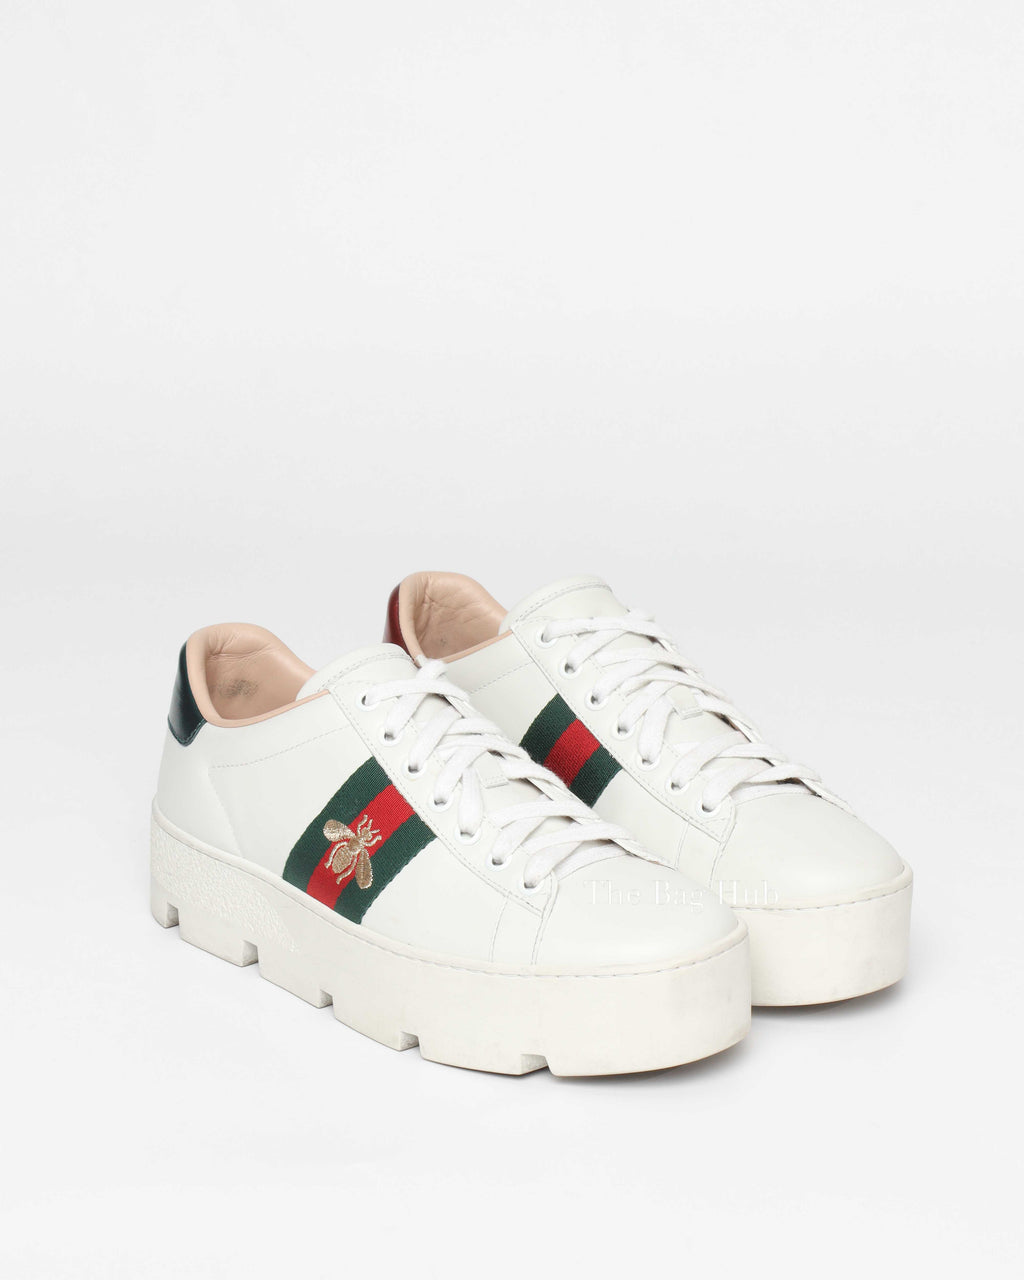 Gucci White Calfskin Women's Ace Embriodered Platform Sneakers Size 36